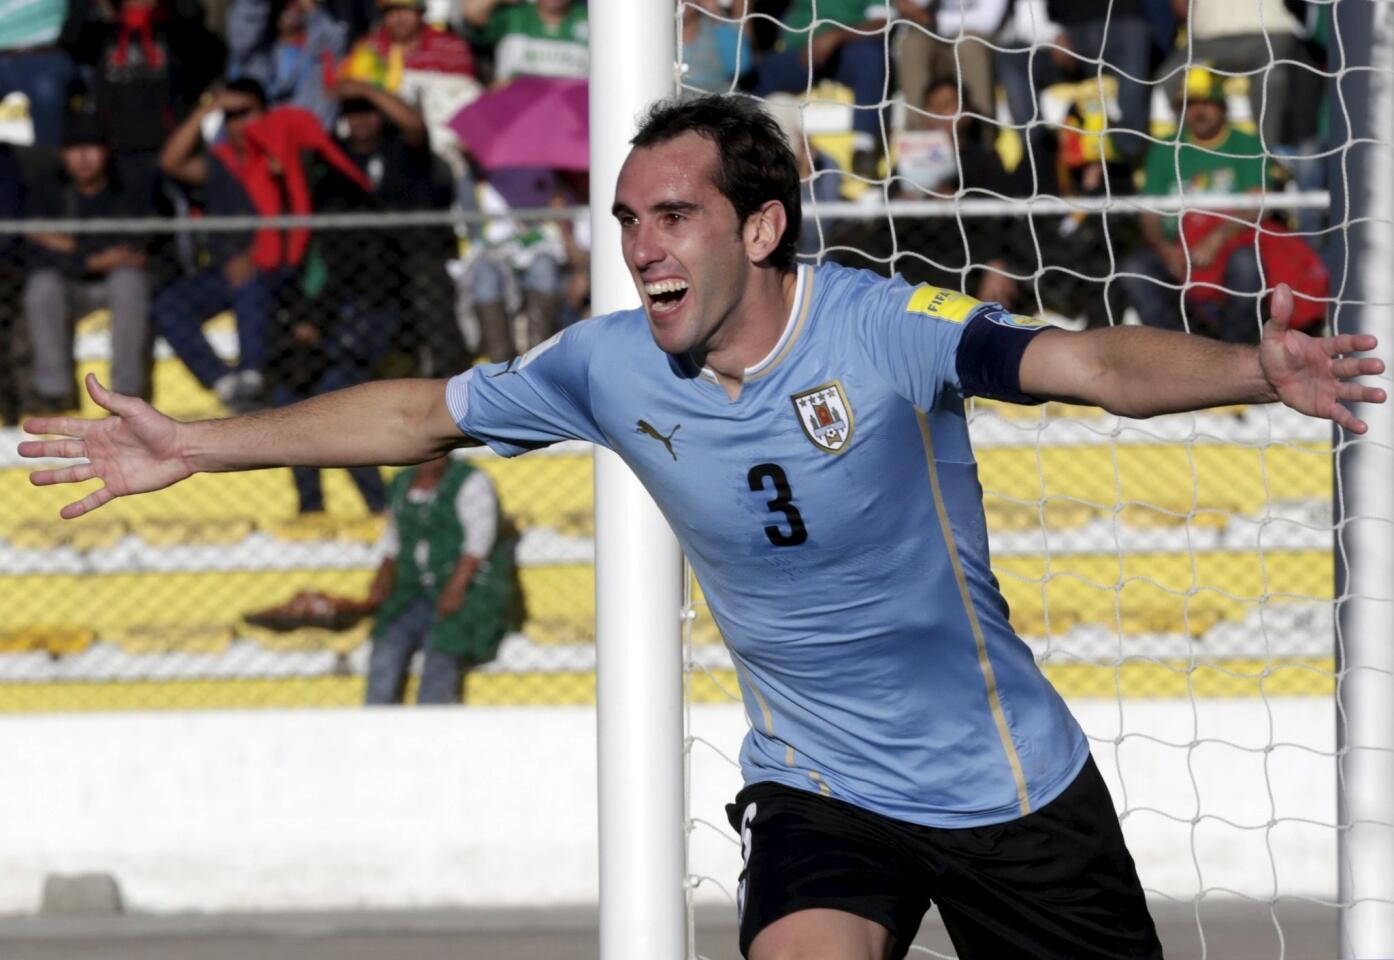 Diego Godin of Uruguay celebrates after scoring against Bolivia during their 2018 World Cup qualifying soccer match in La Paz